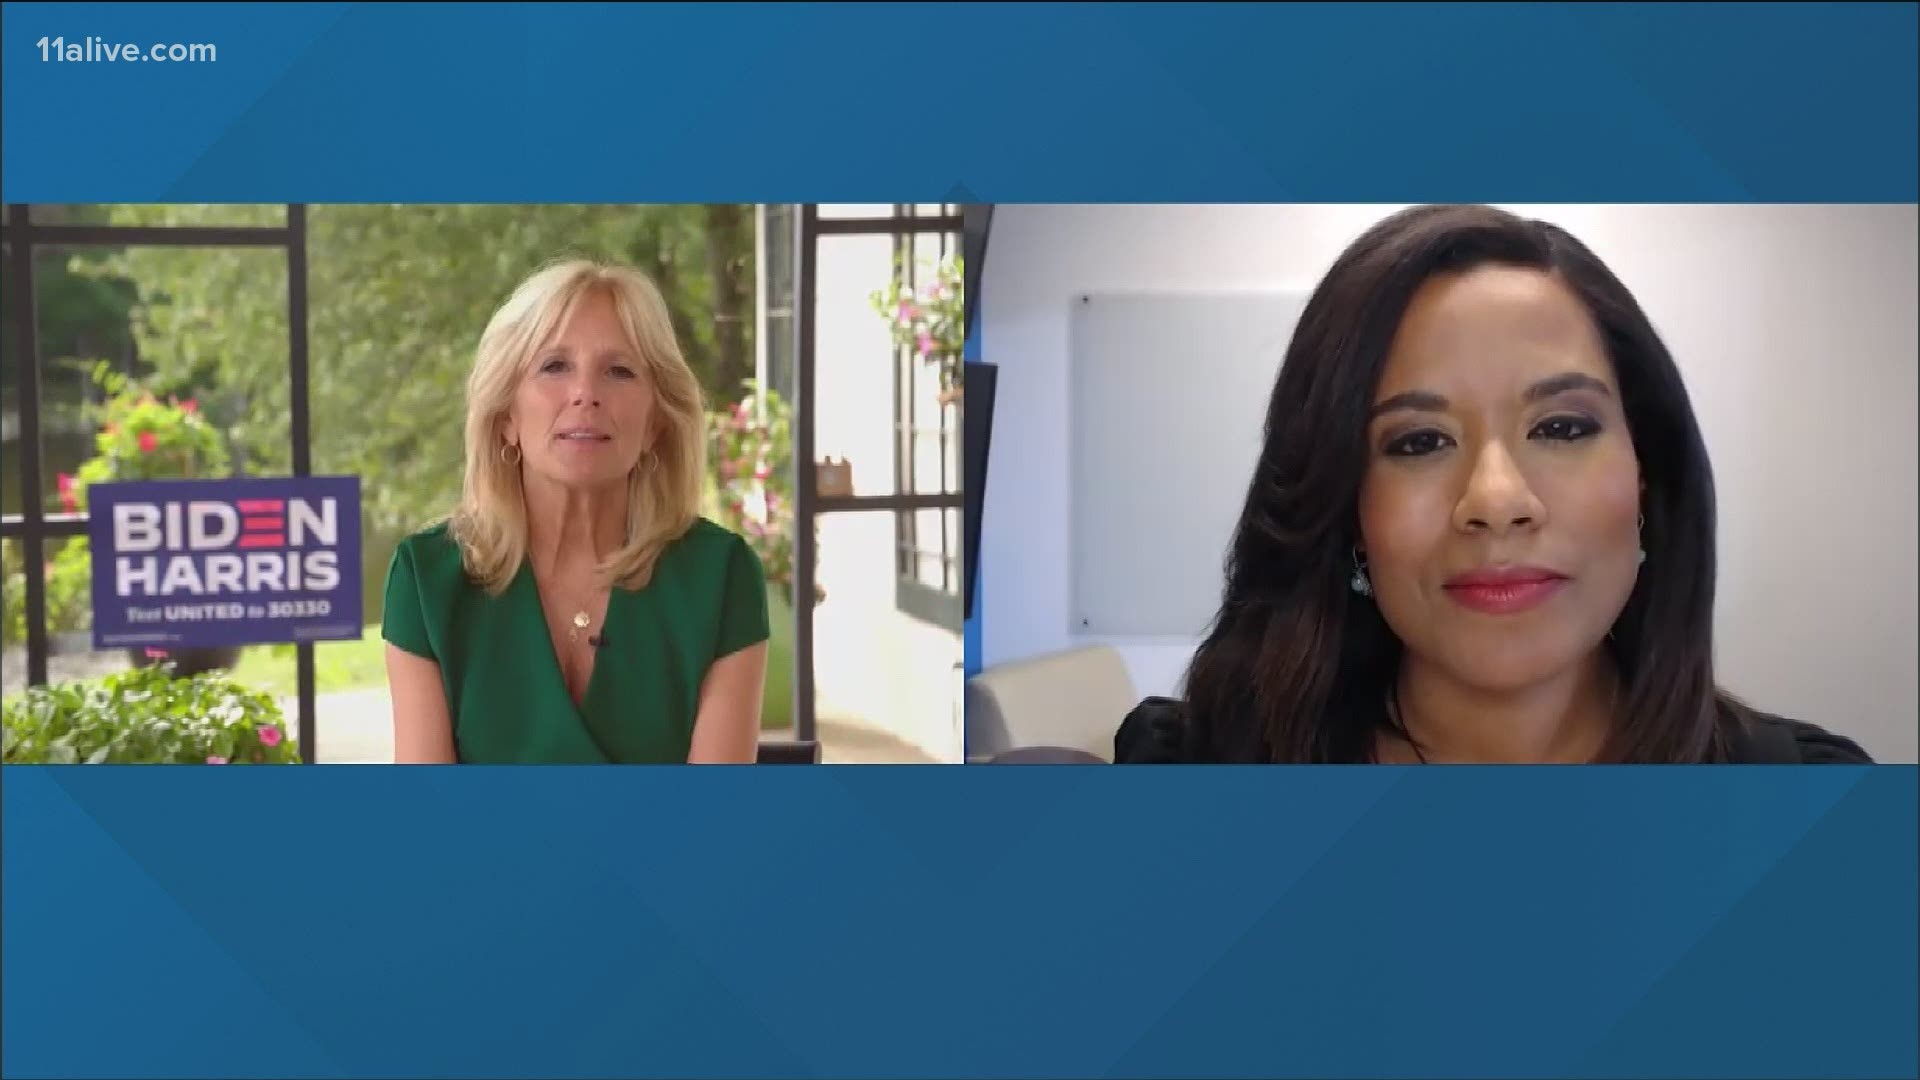 Jill Biden told Morning Rush Anchor Shiba Russell that she misses meeting all of the families face to face. Biden also said voters have to make a plan to vote.